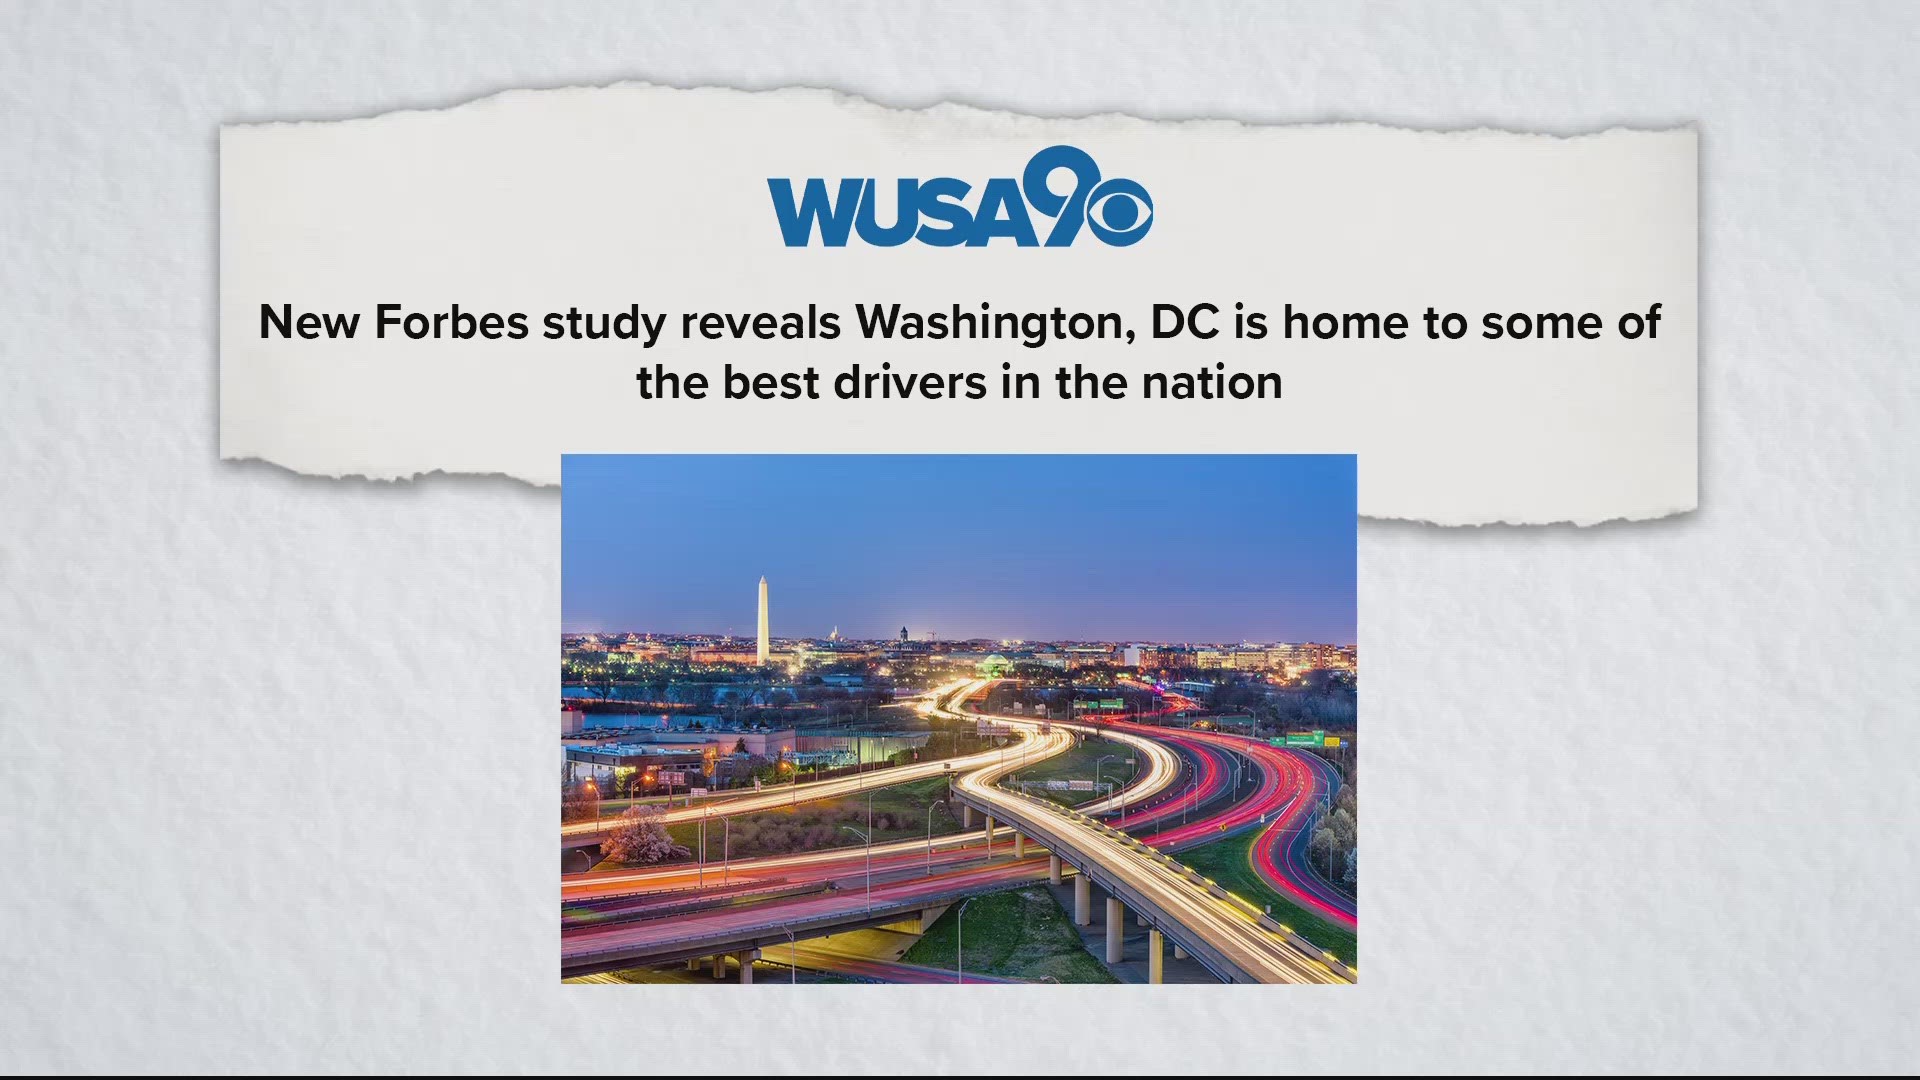 Did you know that Washington, D.C. is home to some of the best drivers in the nation? That's according to a new Forbes study.